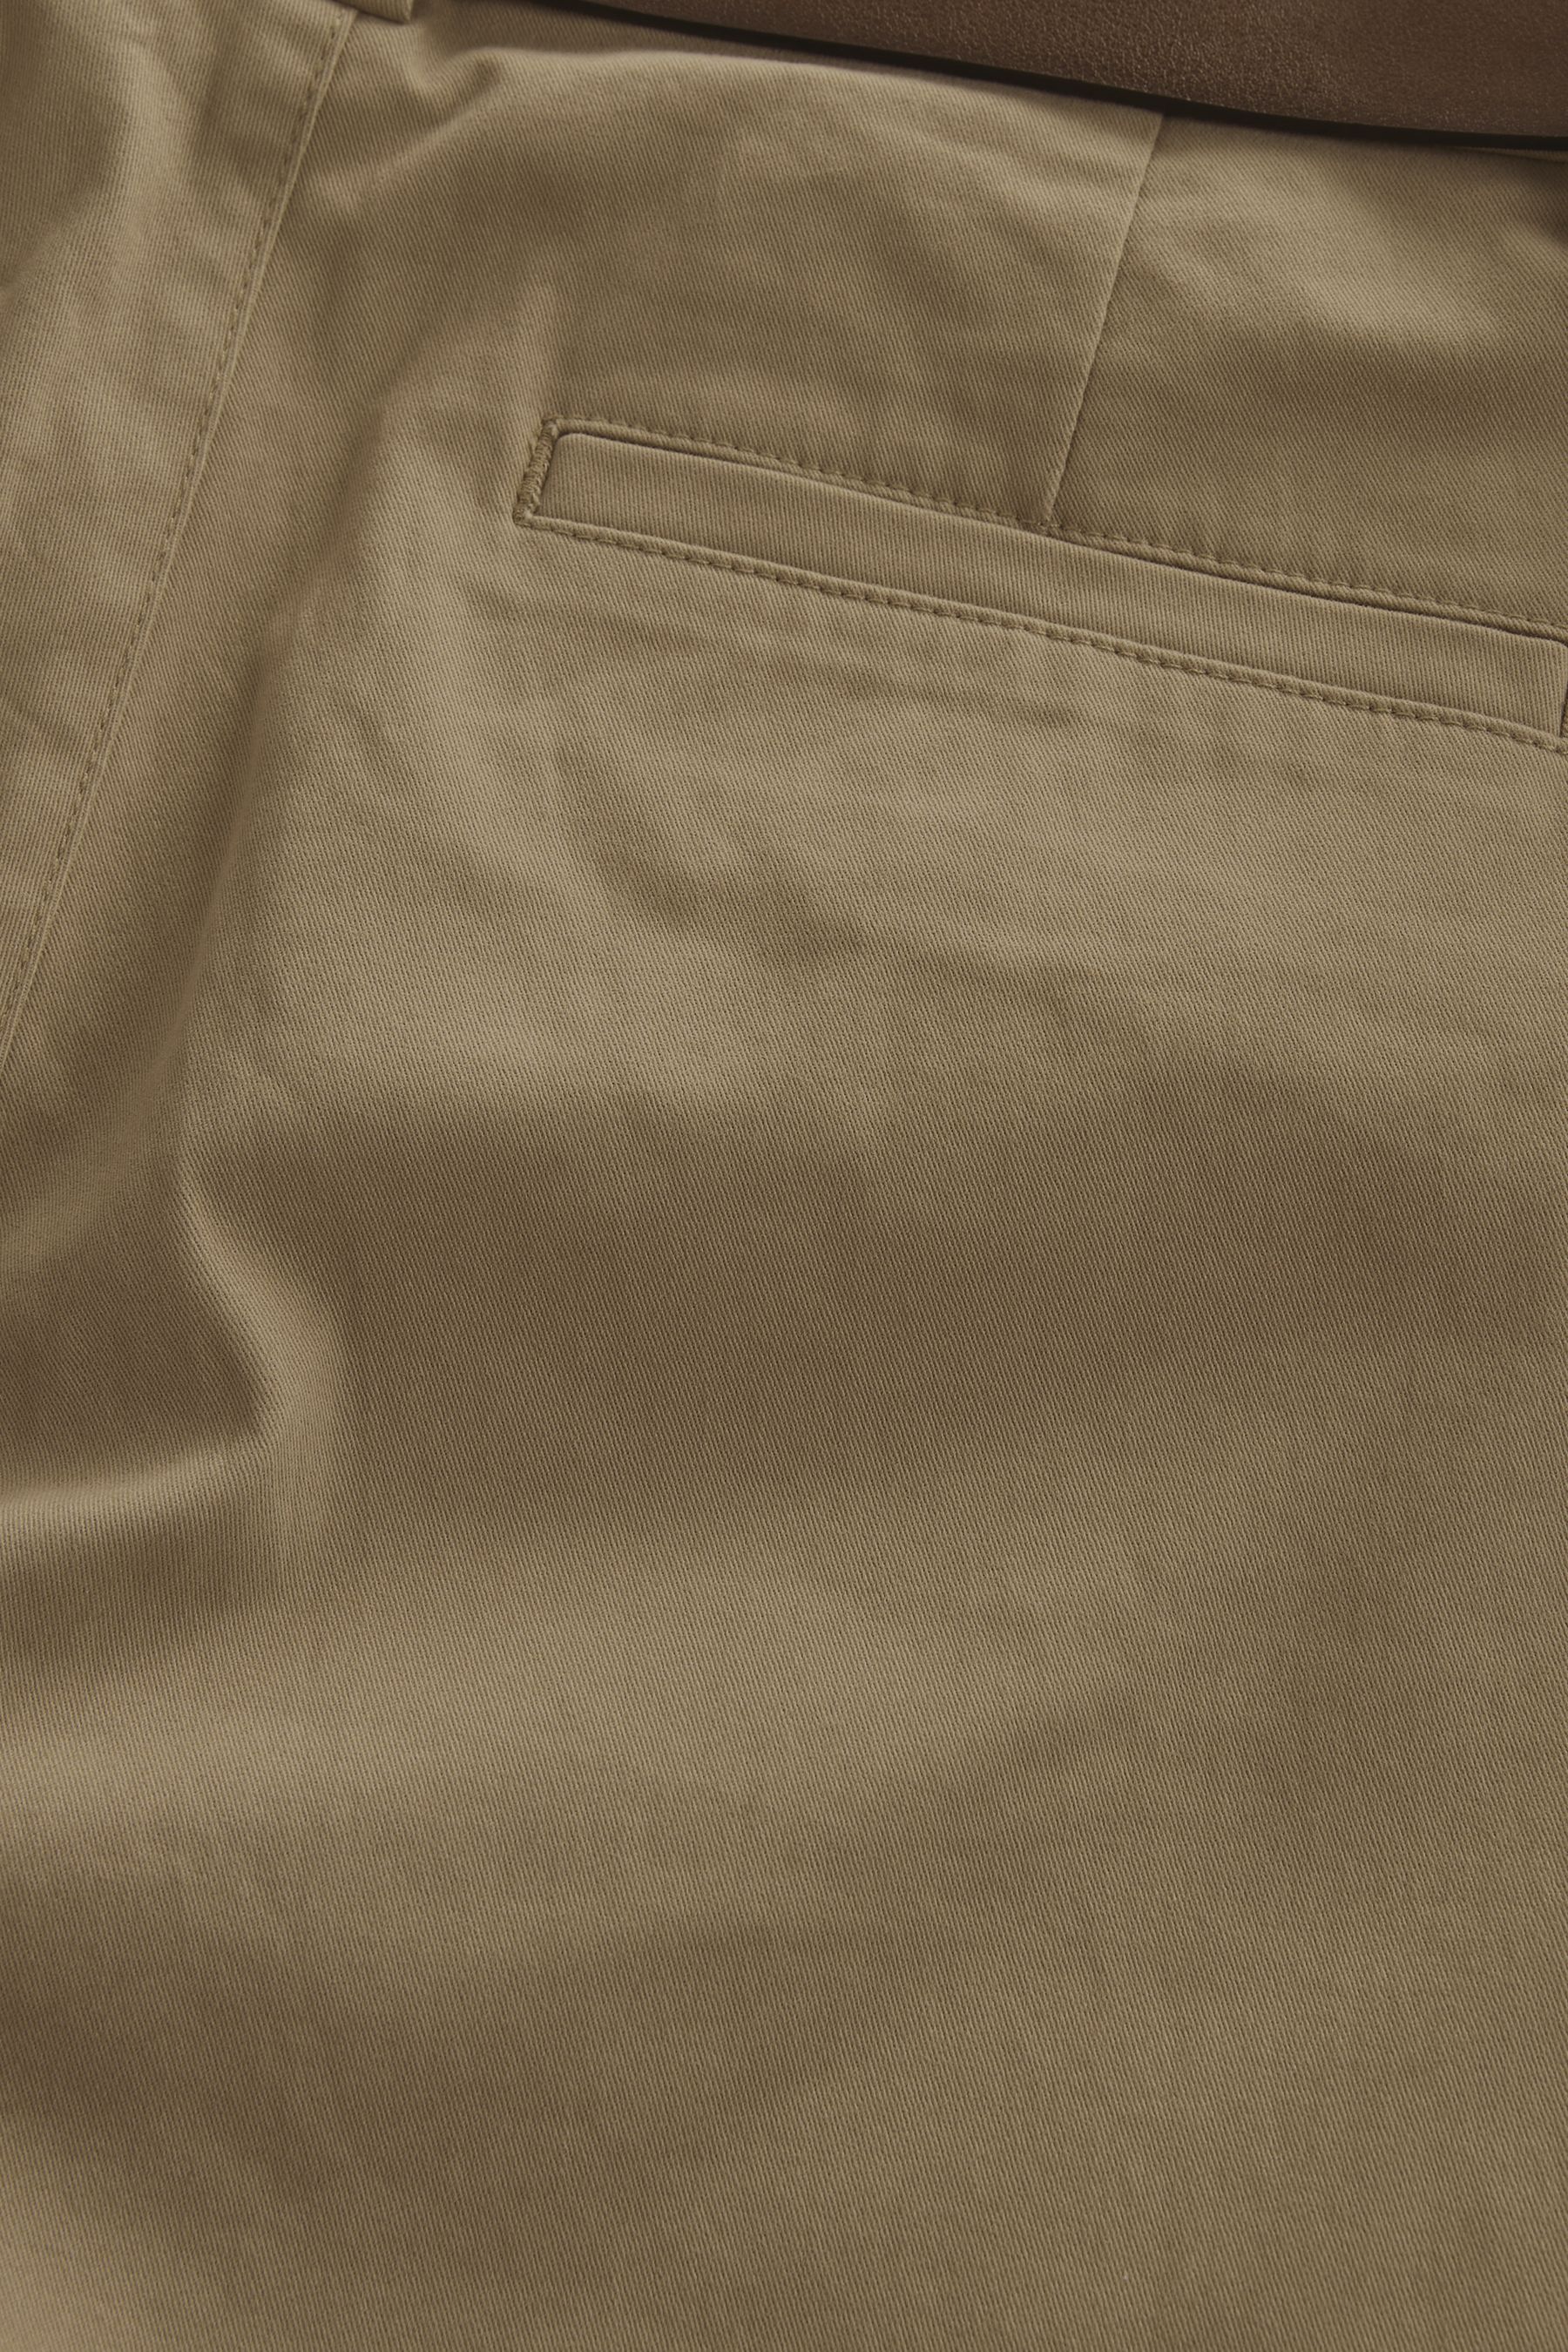 Belted Soft Touch Chino Trousers Straight Fit